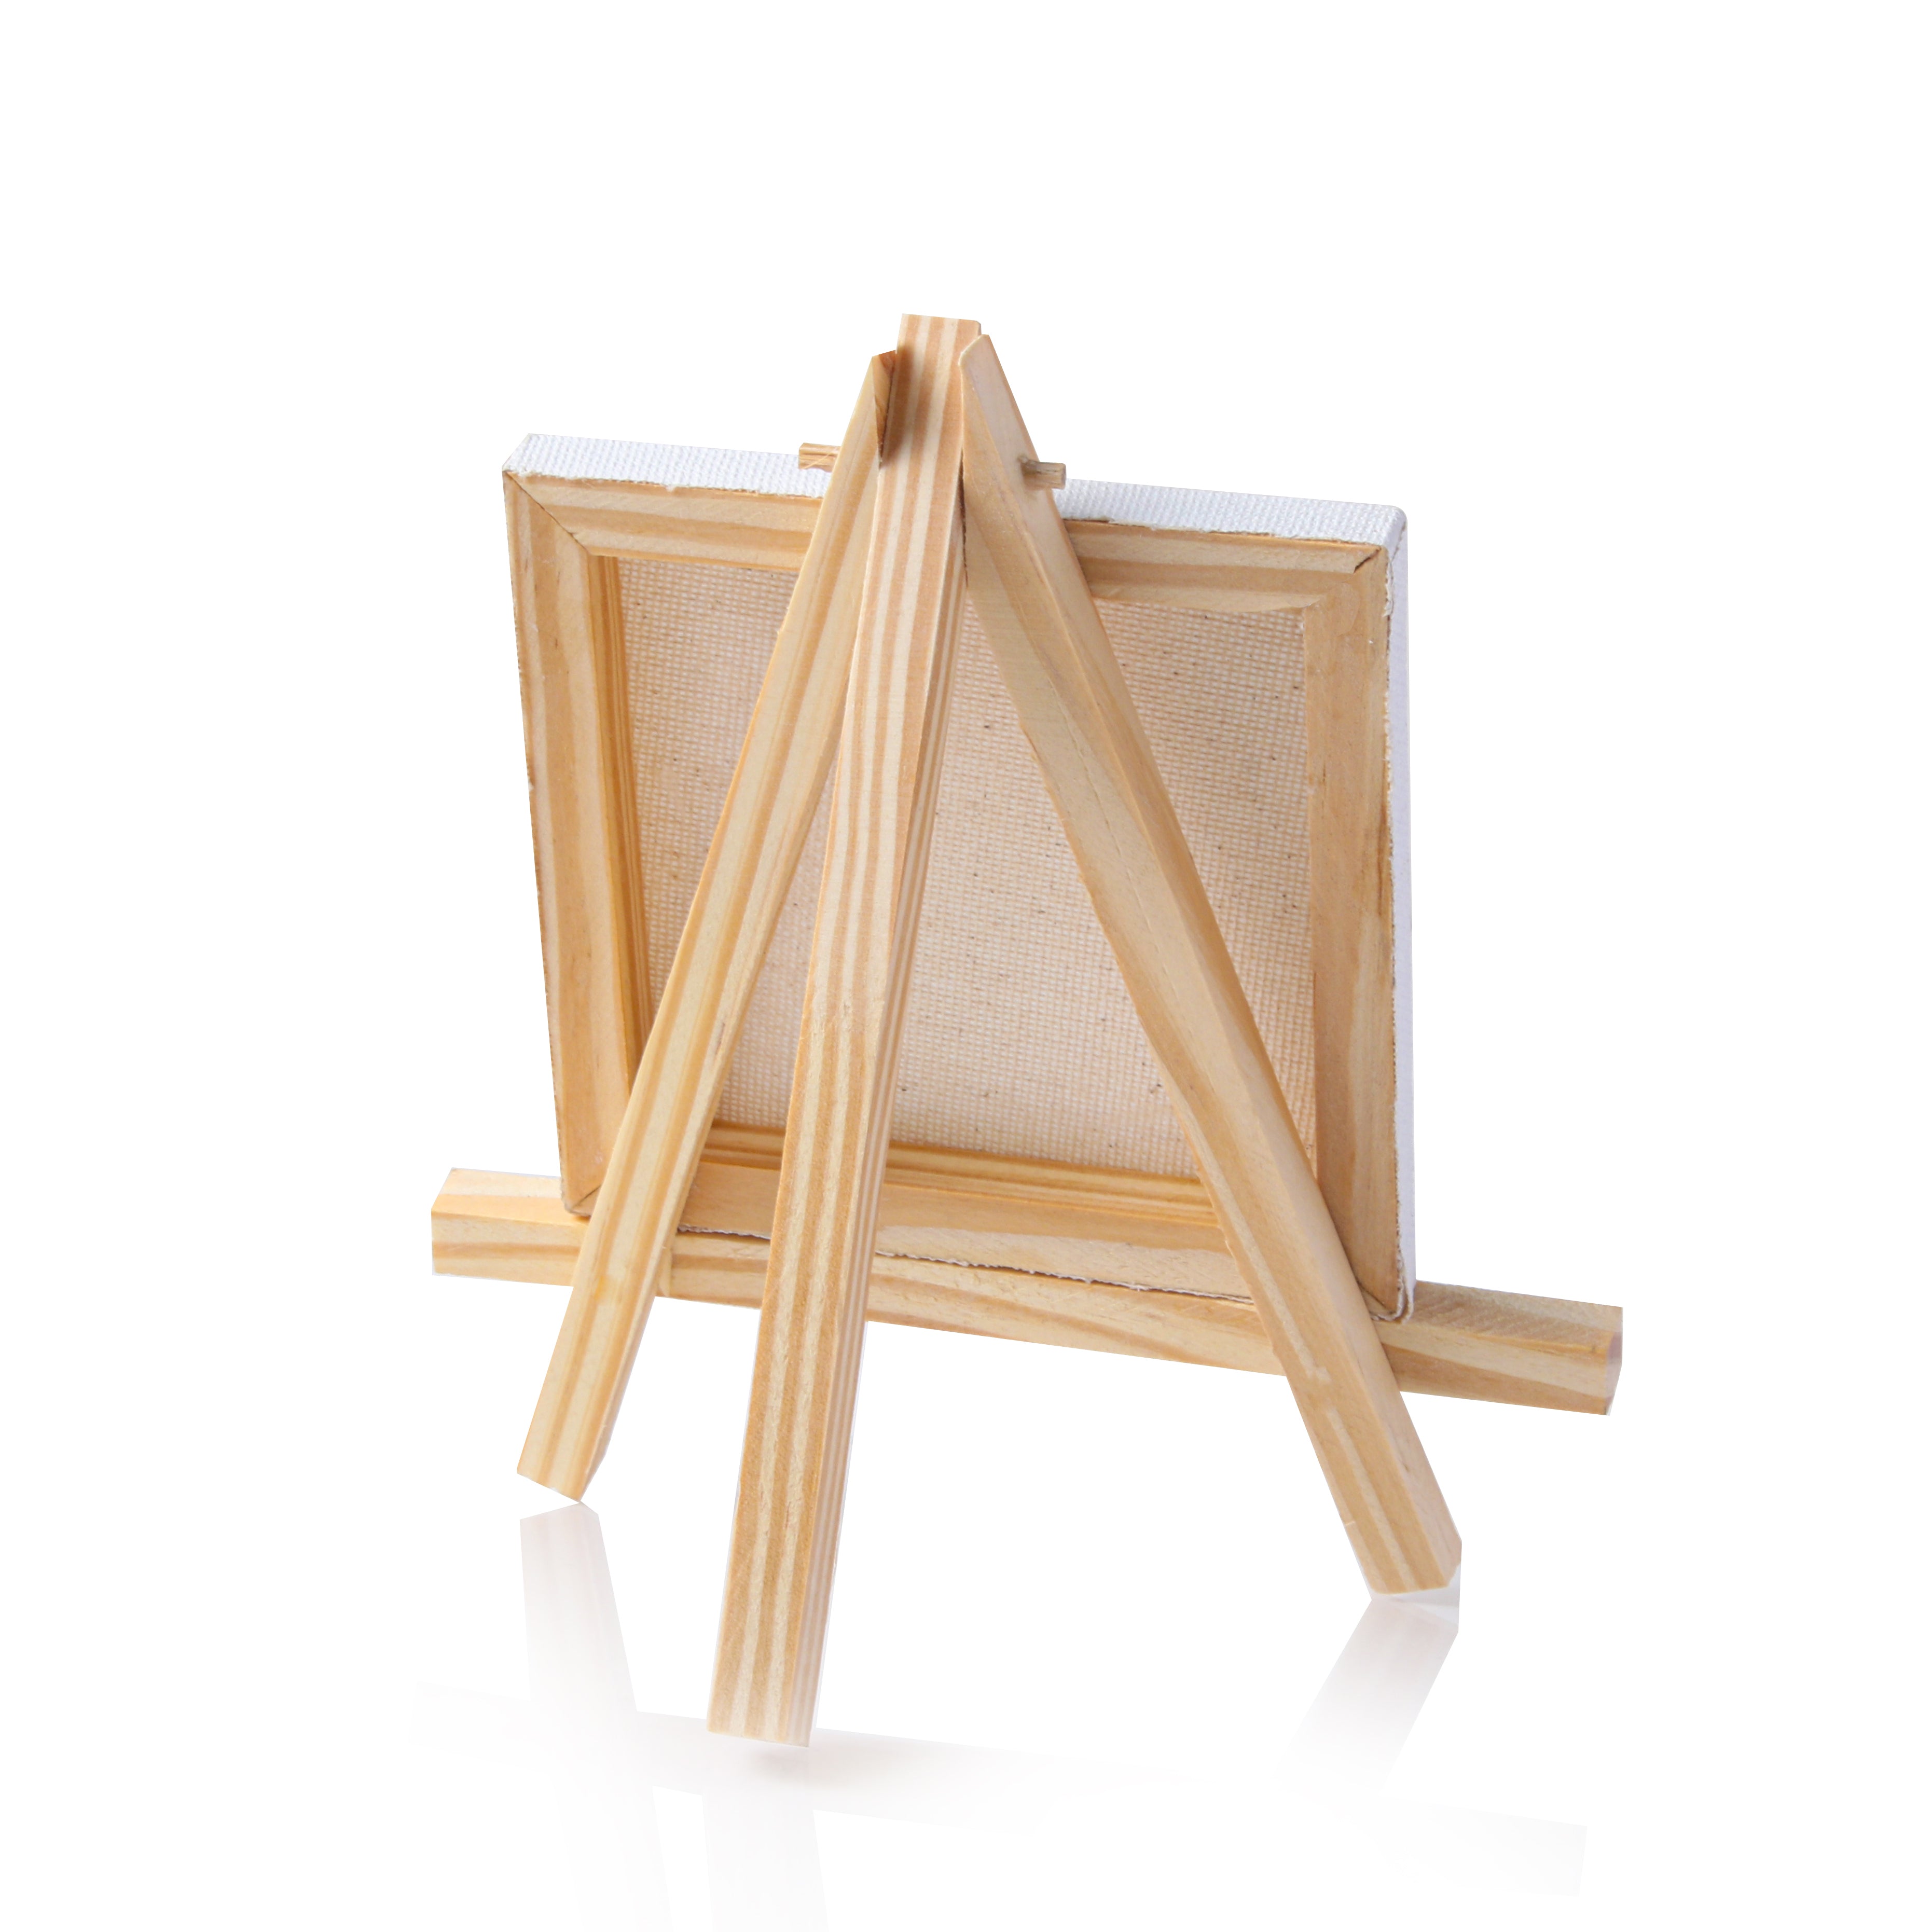 Wooden Mini Easel With Canvas Easel Size 11Cm Canvas Size 10 X 7.5Cm 1Pc